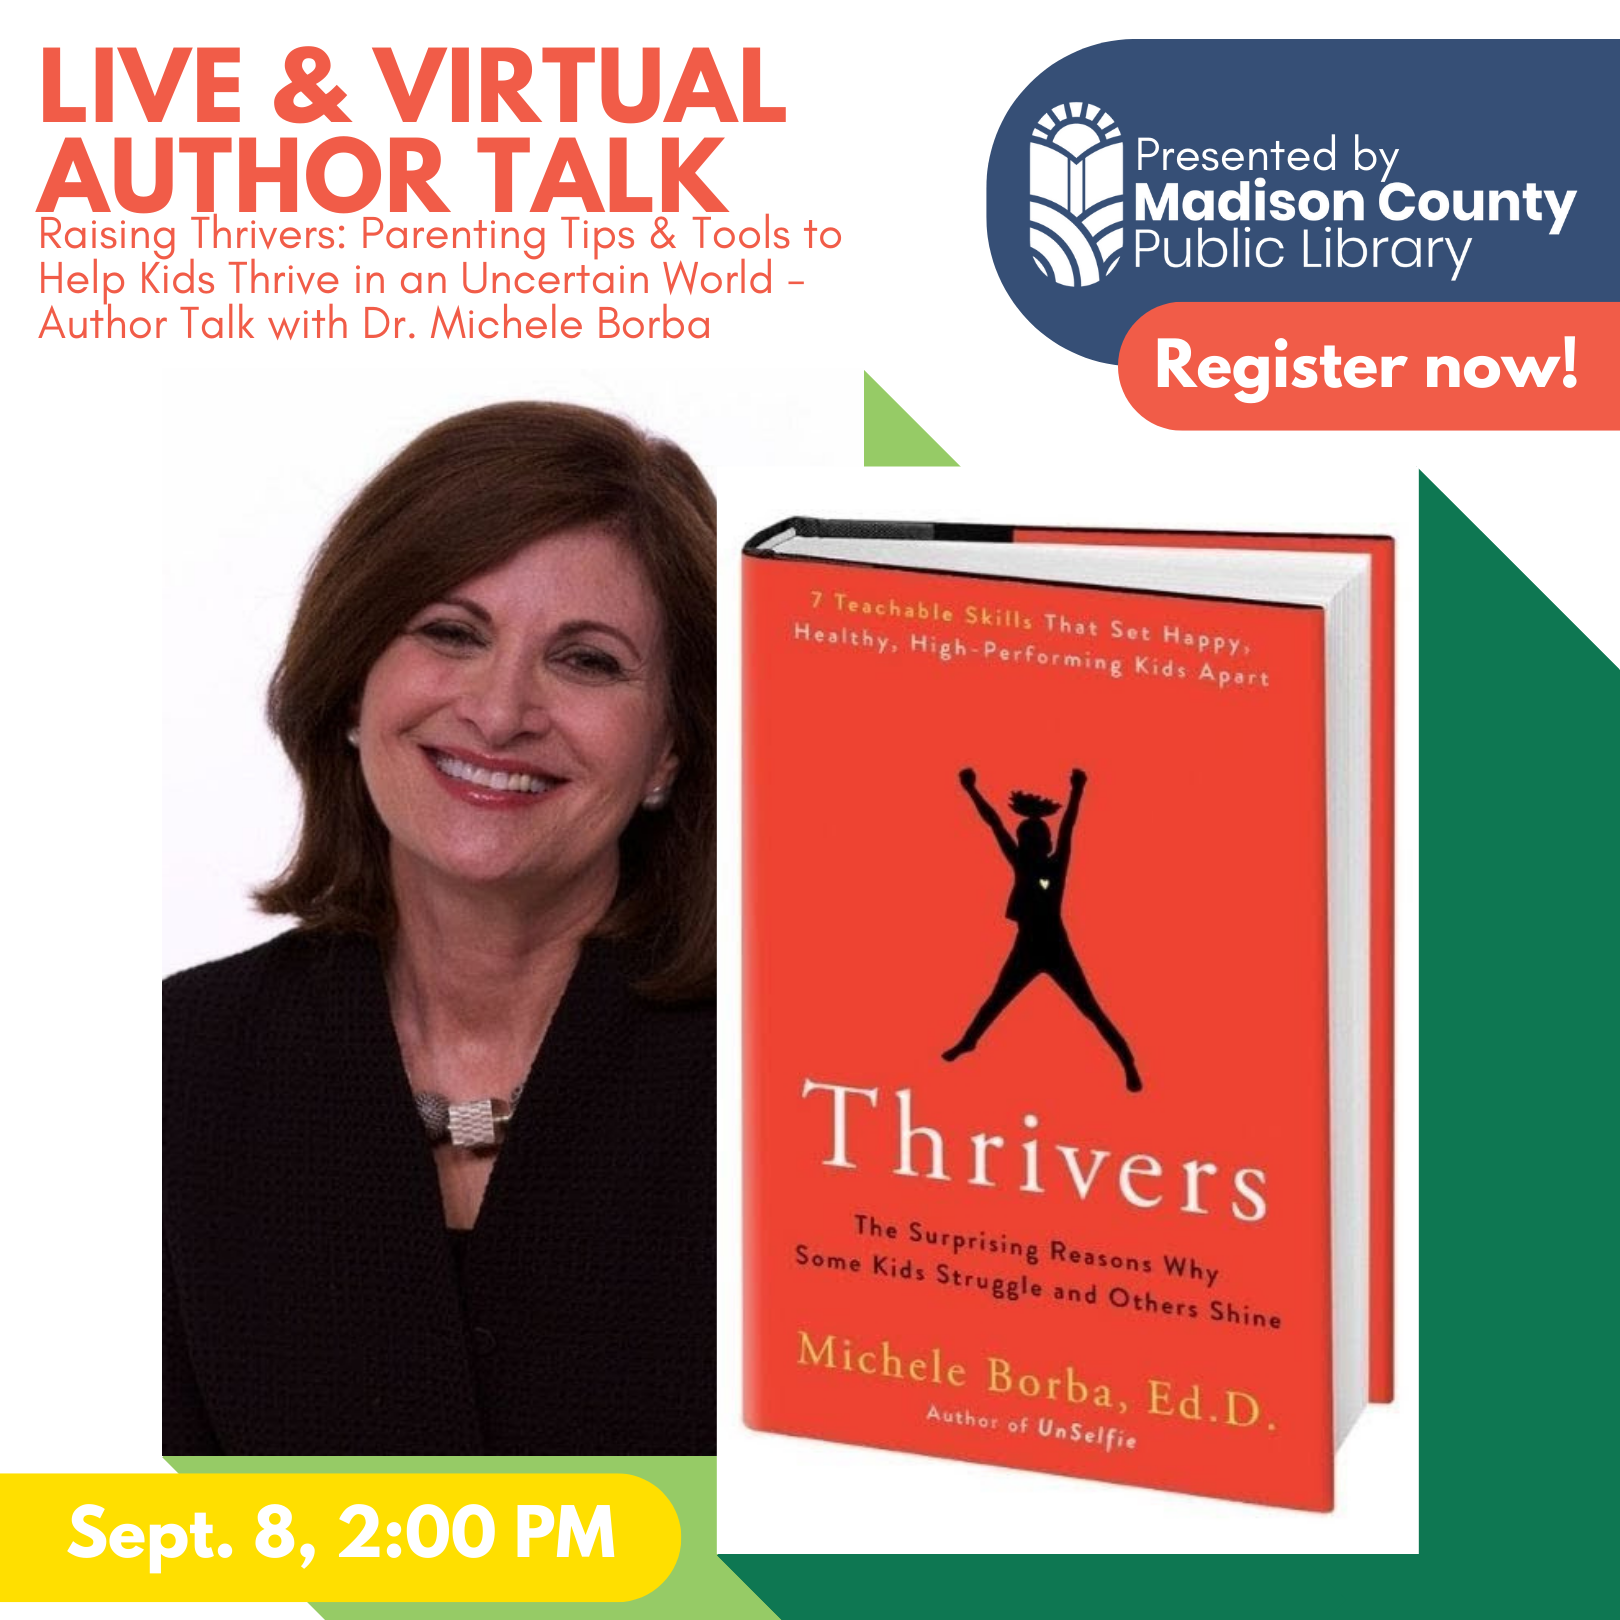 Live and Virtual Author Talk with Michele Borba